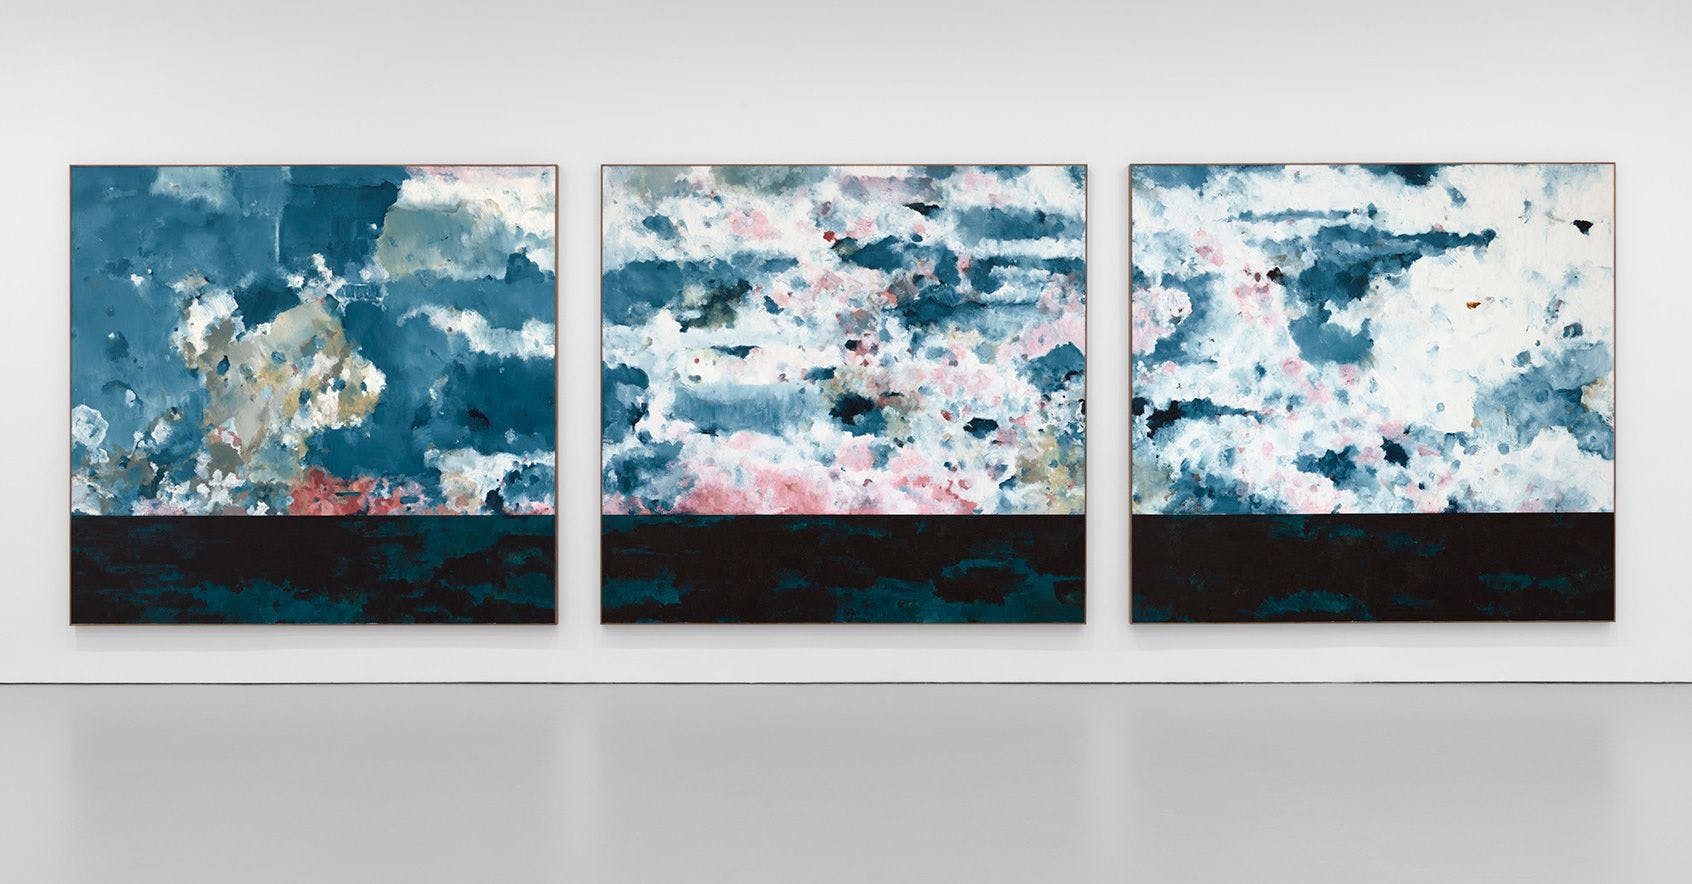 An installation view of a painting by Harold Ancart, titled The Sea, dated 2020.